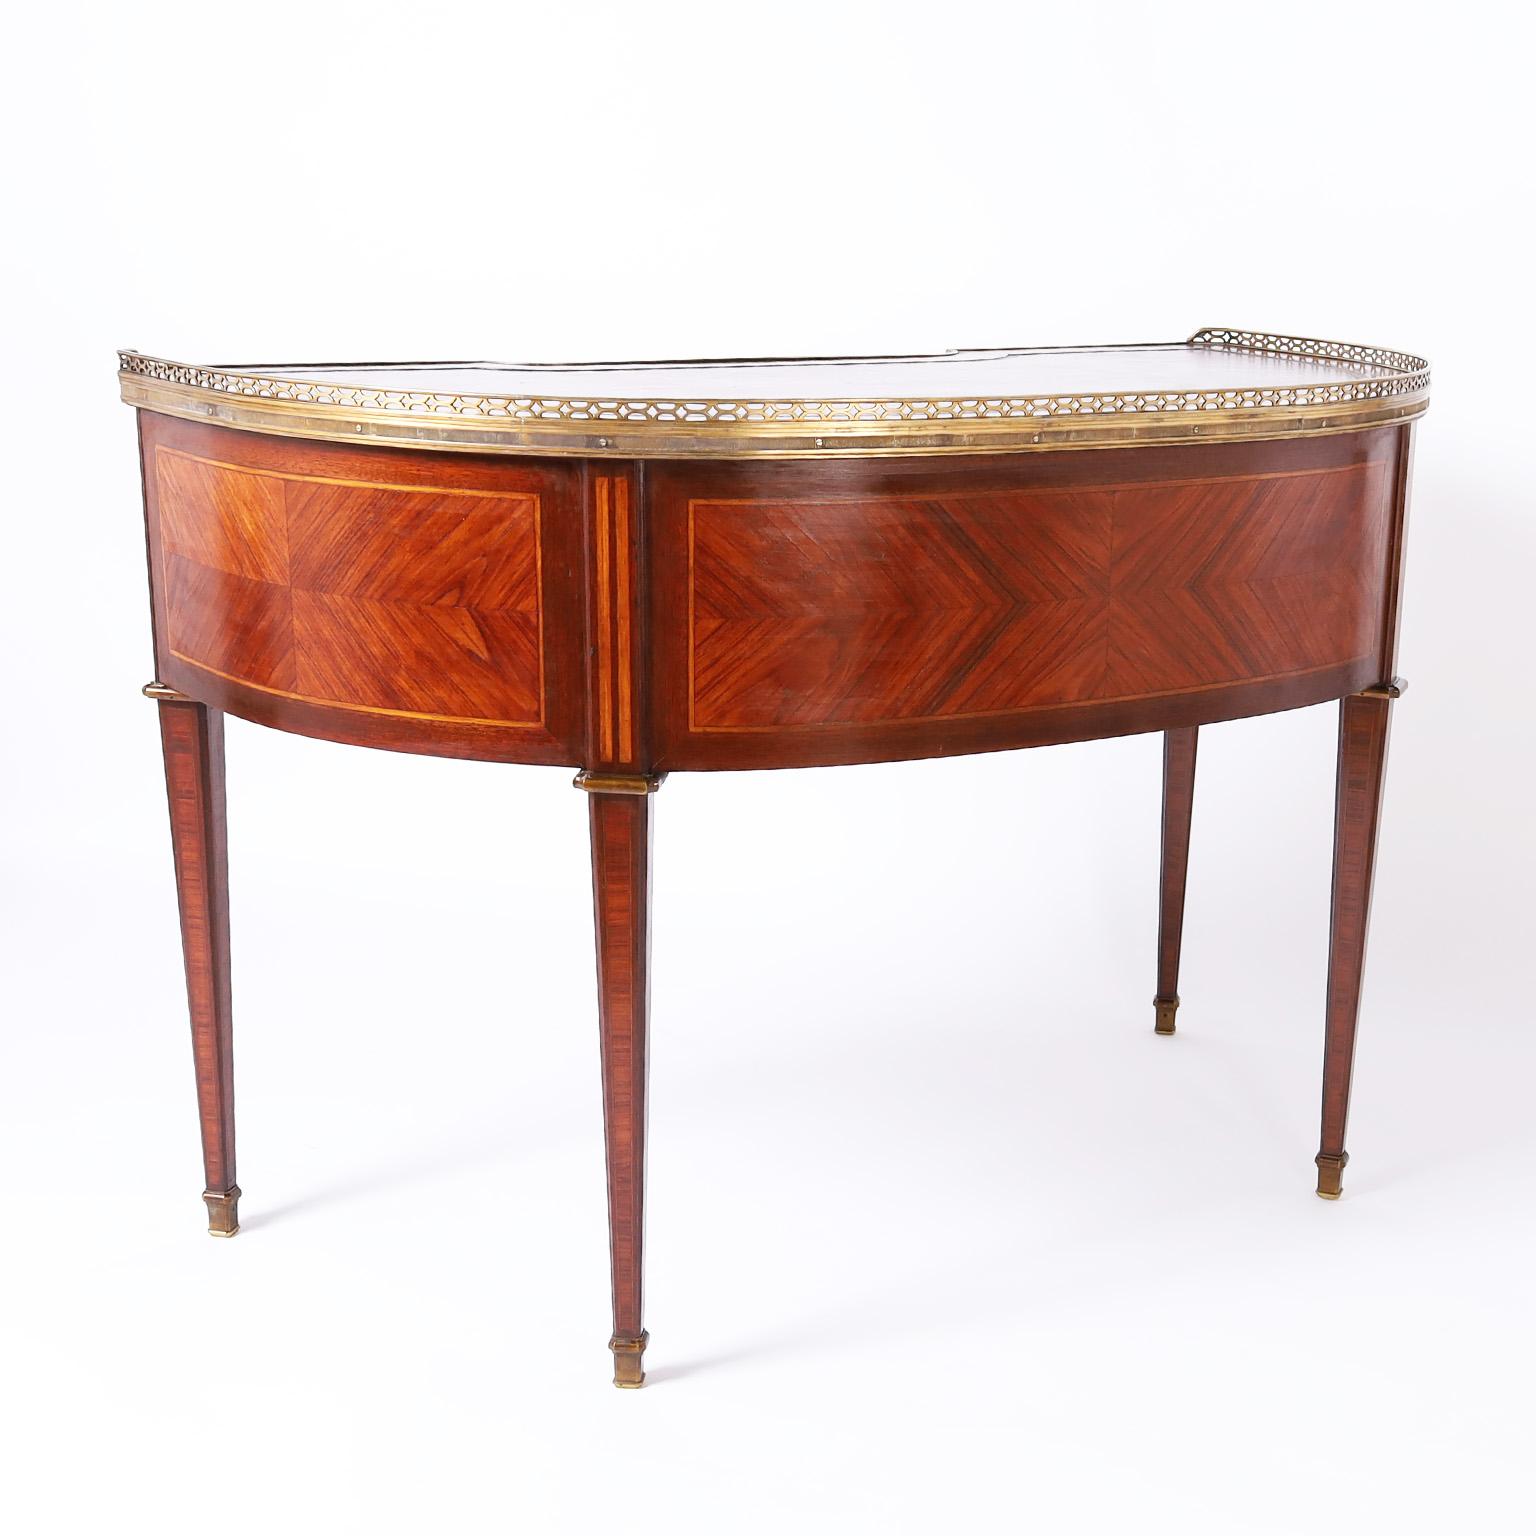 Antique Louis XVI Style French Demi Lune Leather Top Desk In Good Condition For Sale In Palm Beach, FL